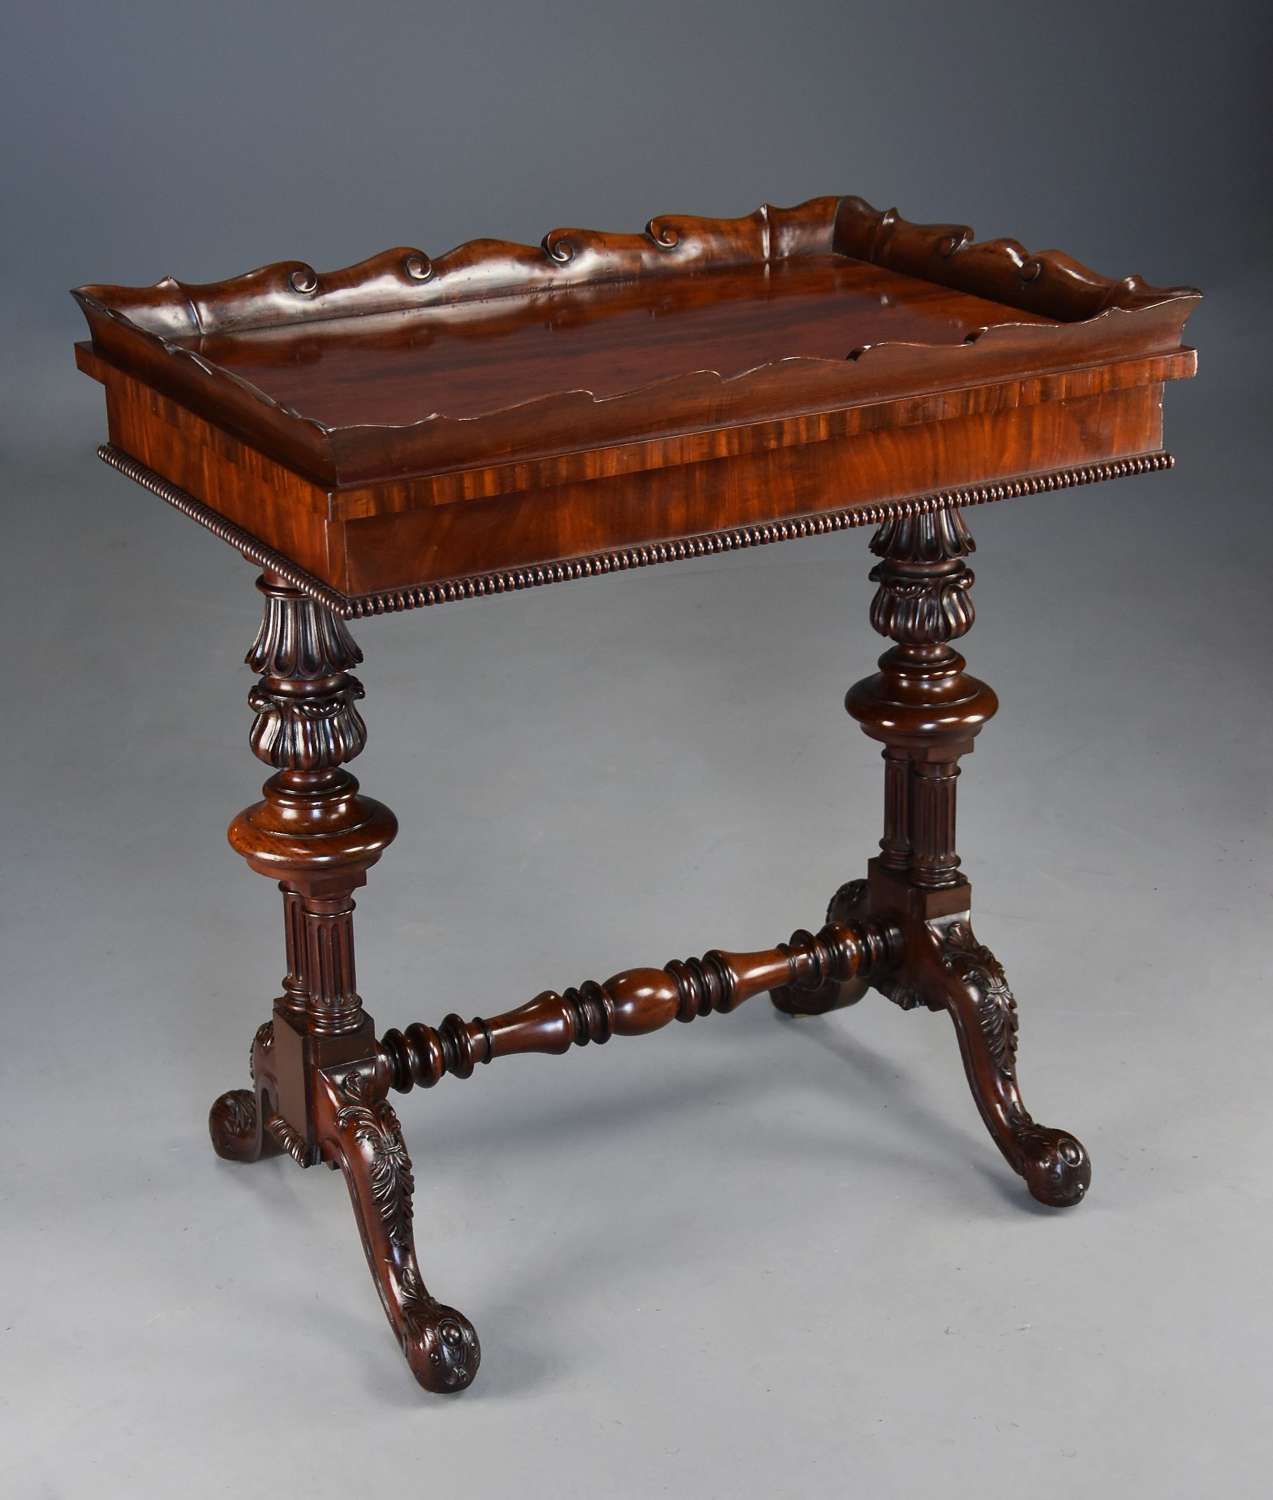 Superb quality early 19thc Regency Gillows mahogany work table